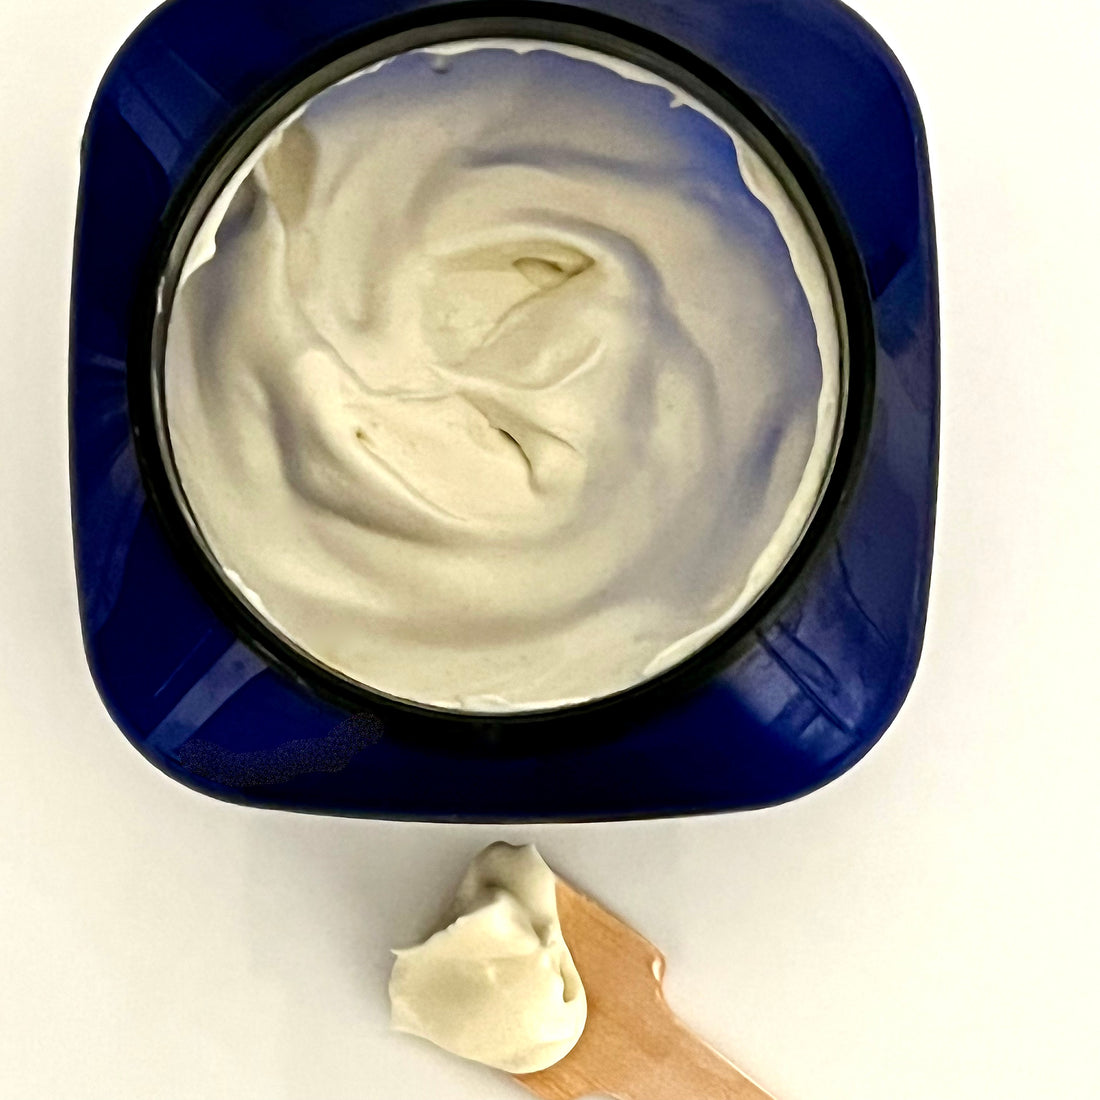 Work With Me Wednesday: Whipped Body Butter